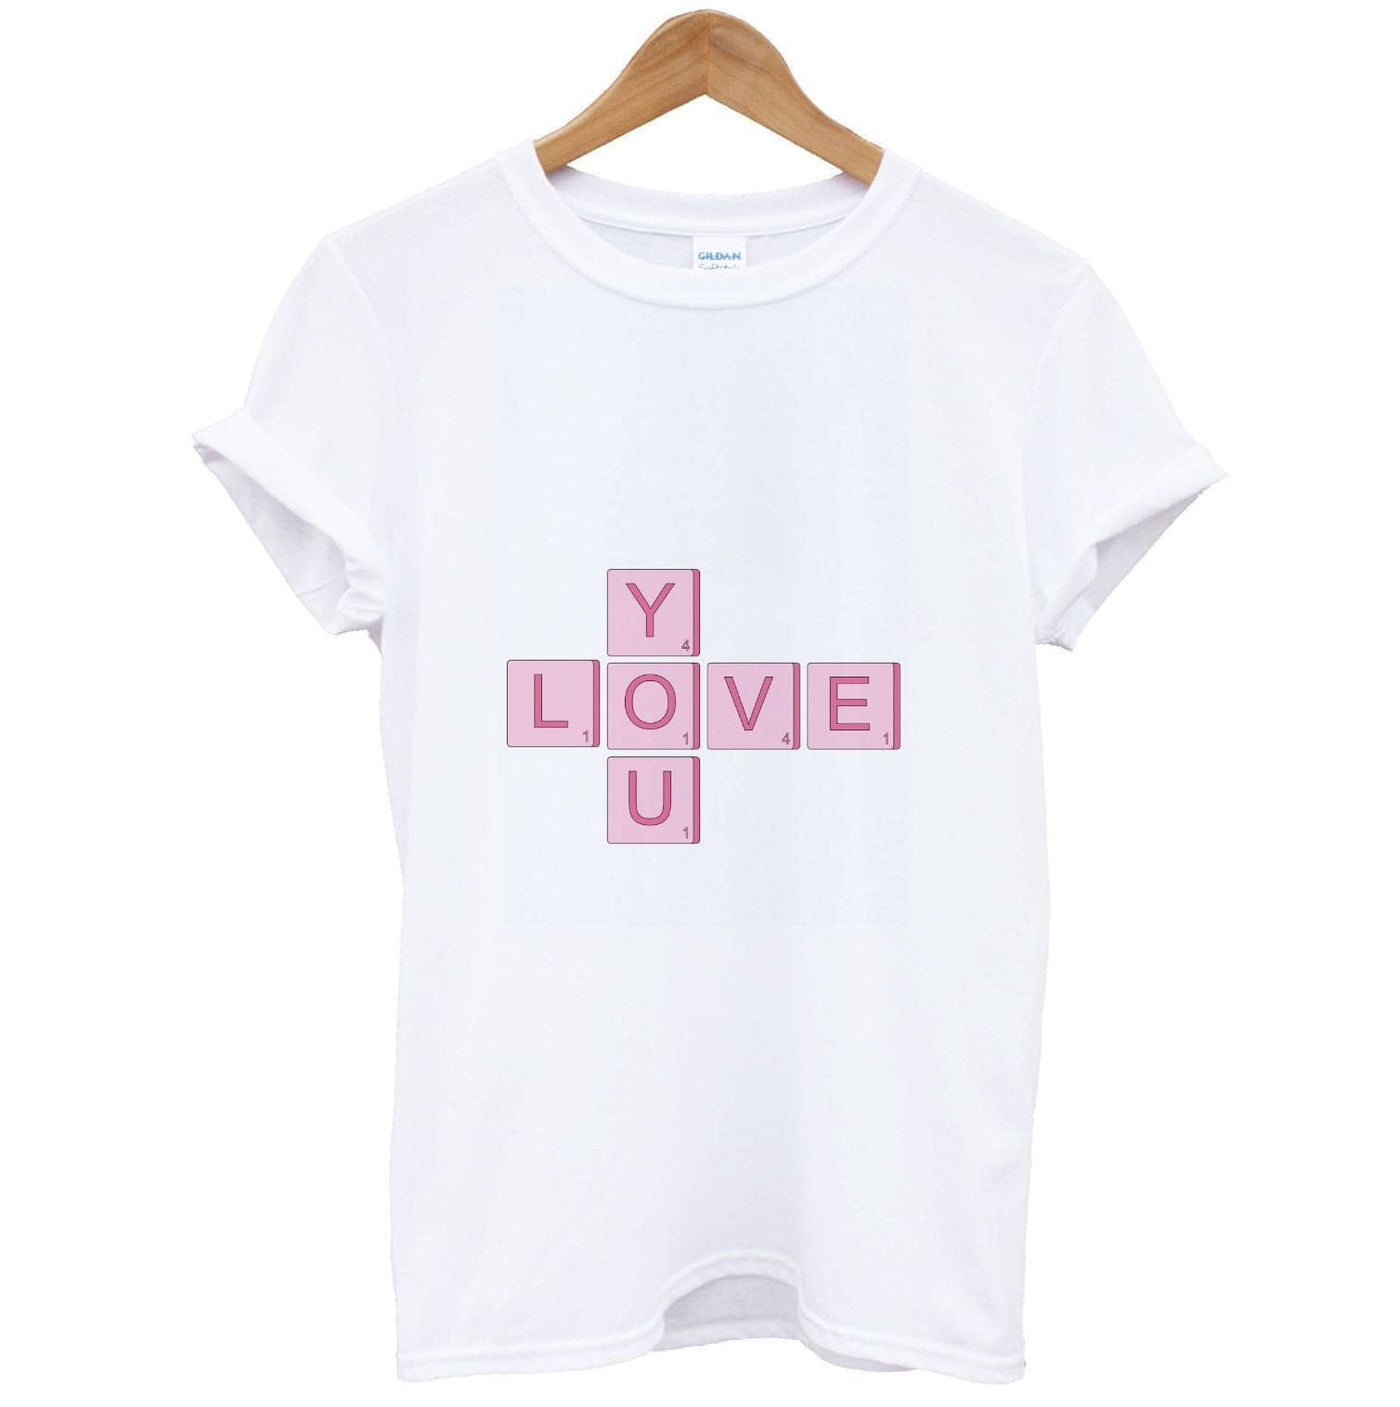 Love You - Valentine's Day T-Shirt